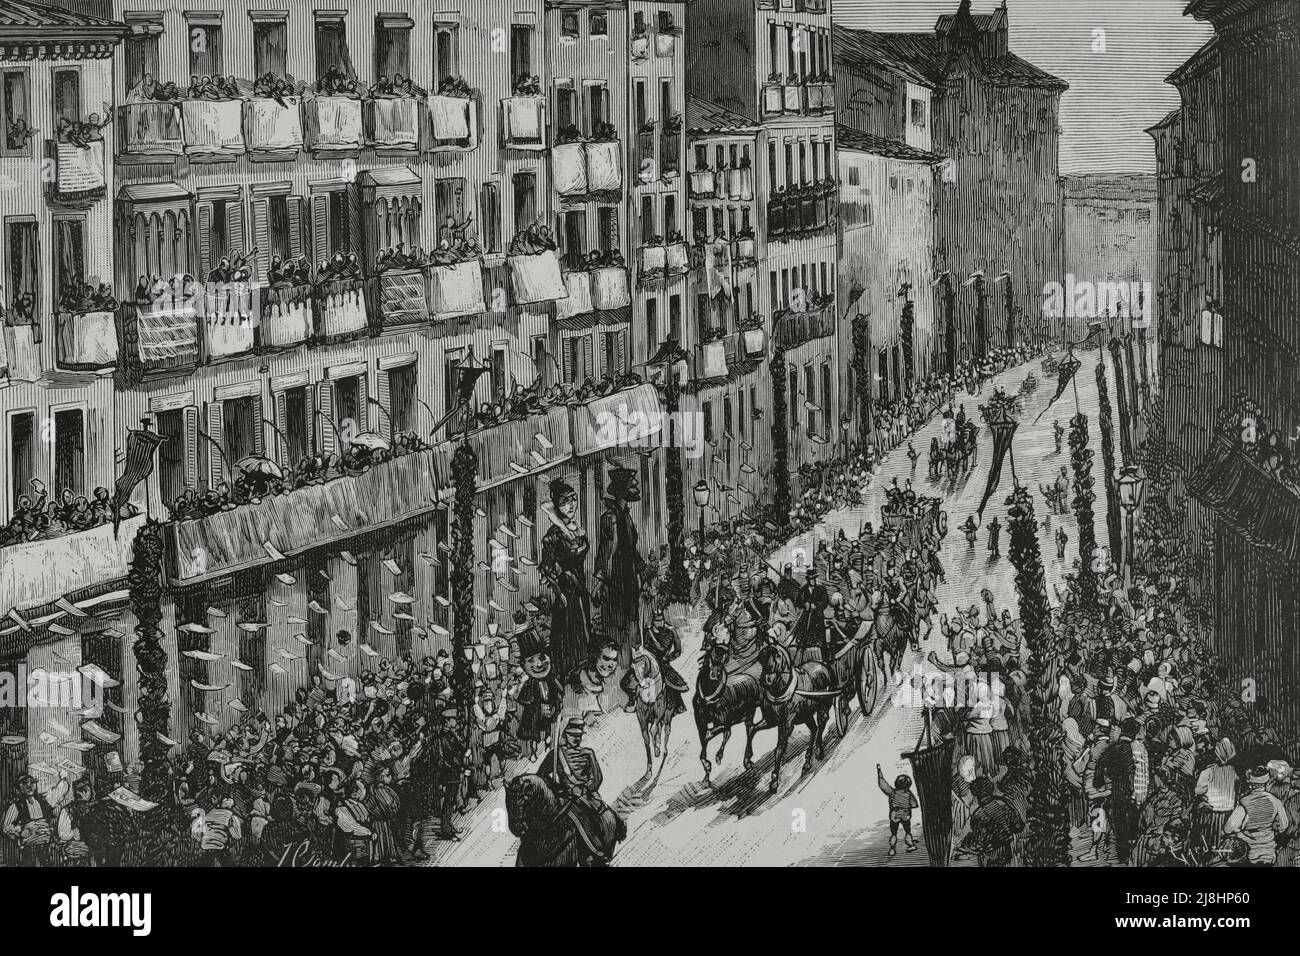 Spain, Aragon, Huesca. Inauguration of the Canfranc railway. Entrance of King Alfonso XII (1857-1885) into the city of Huesca, on October 22, 1882. Engraving by Capuz. Stock Photo